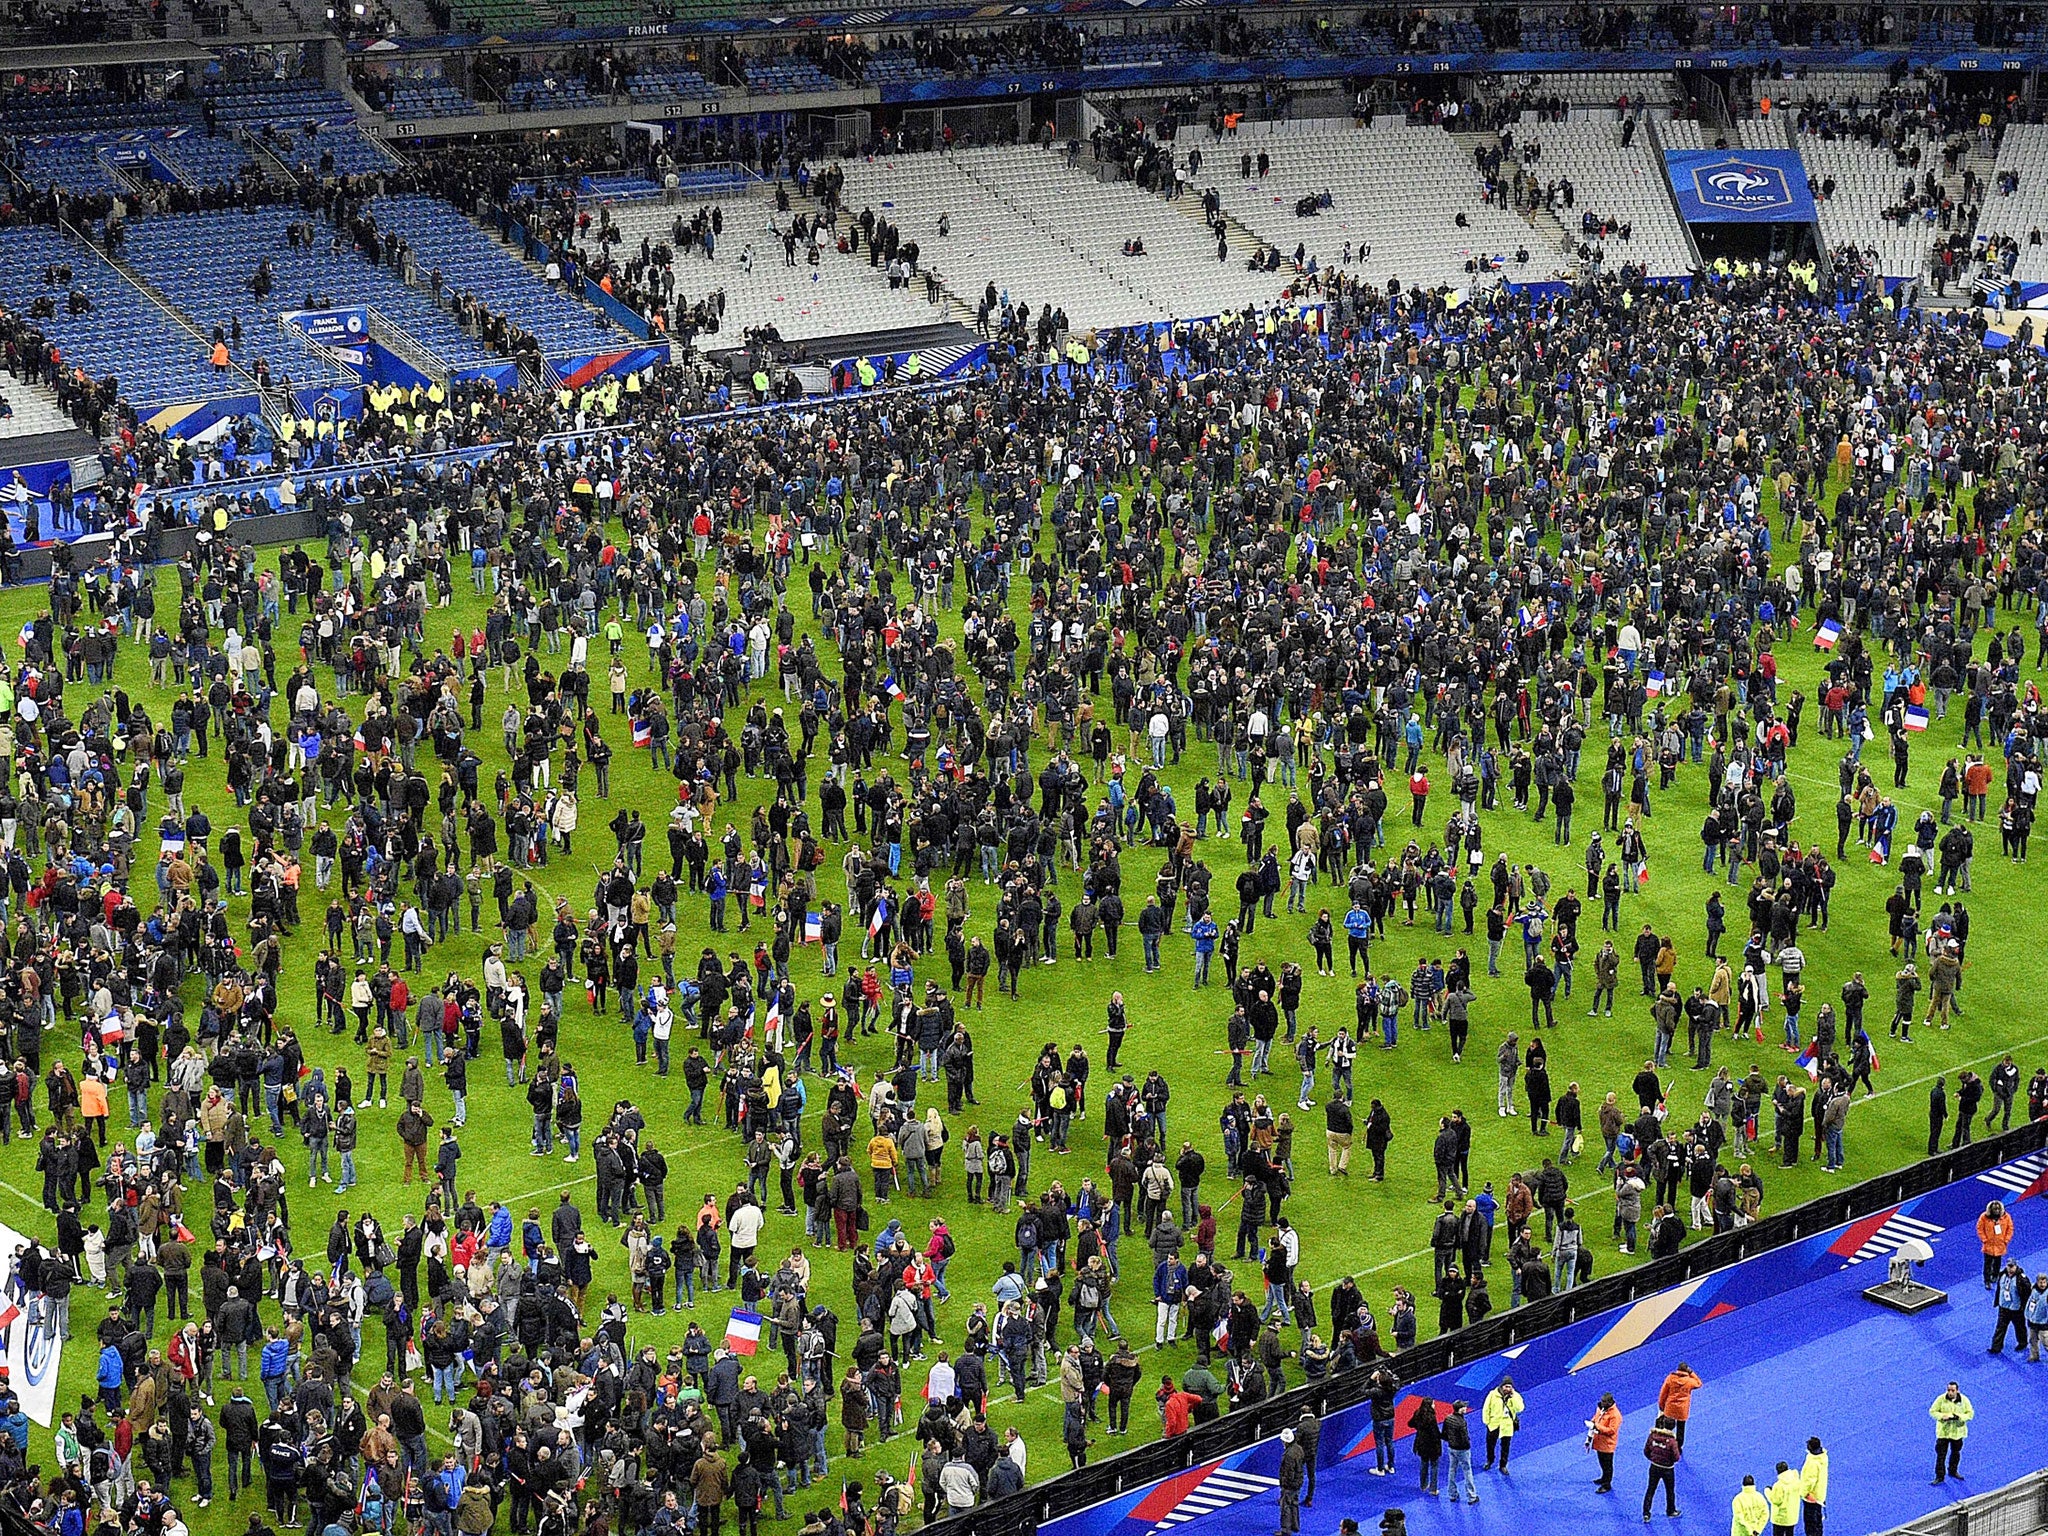 Spectators gather on the Stade de France pitch anxious to discover what had happened outside